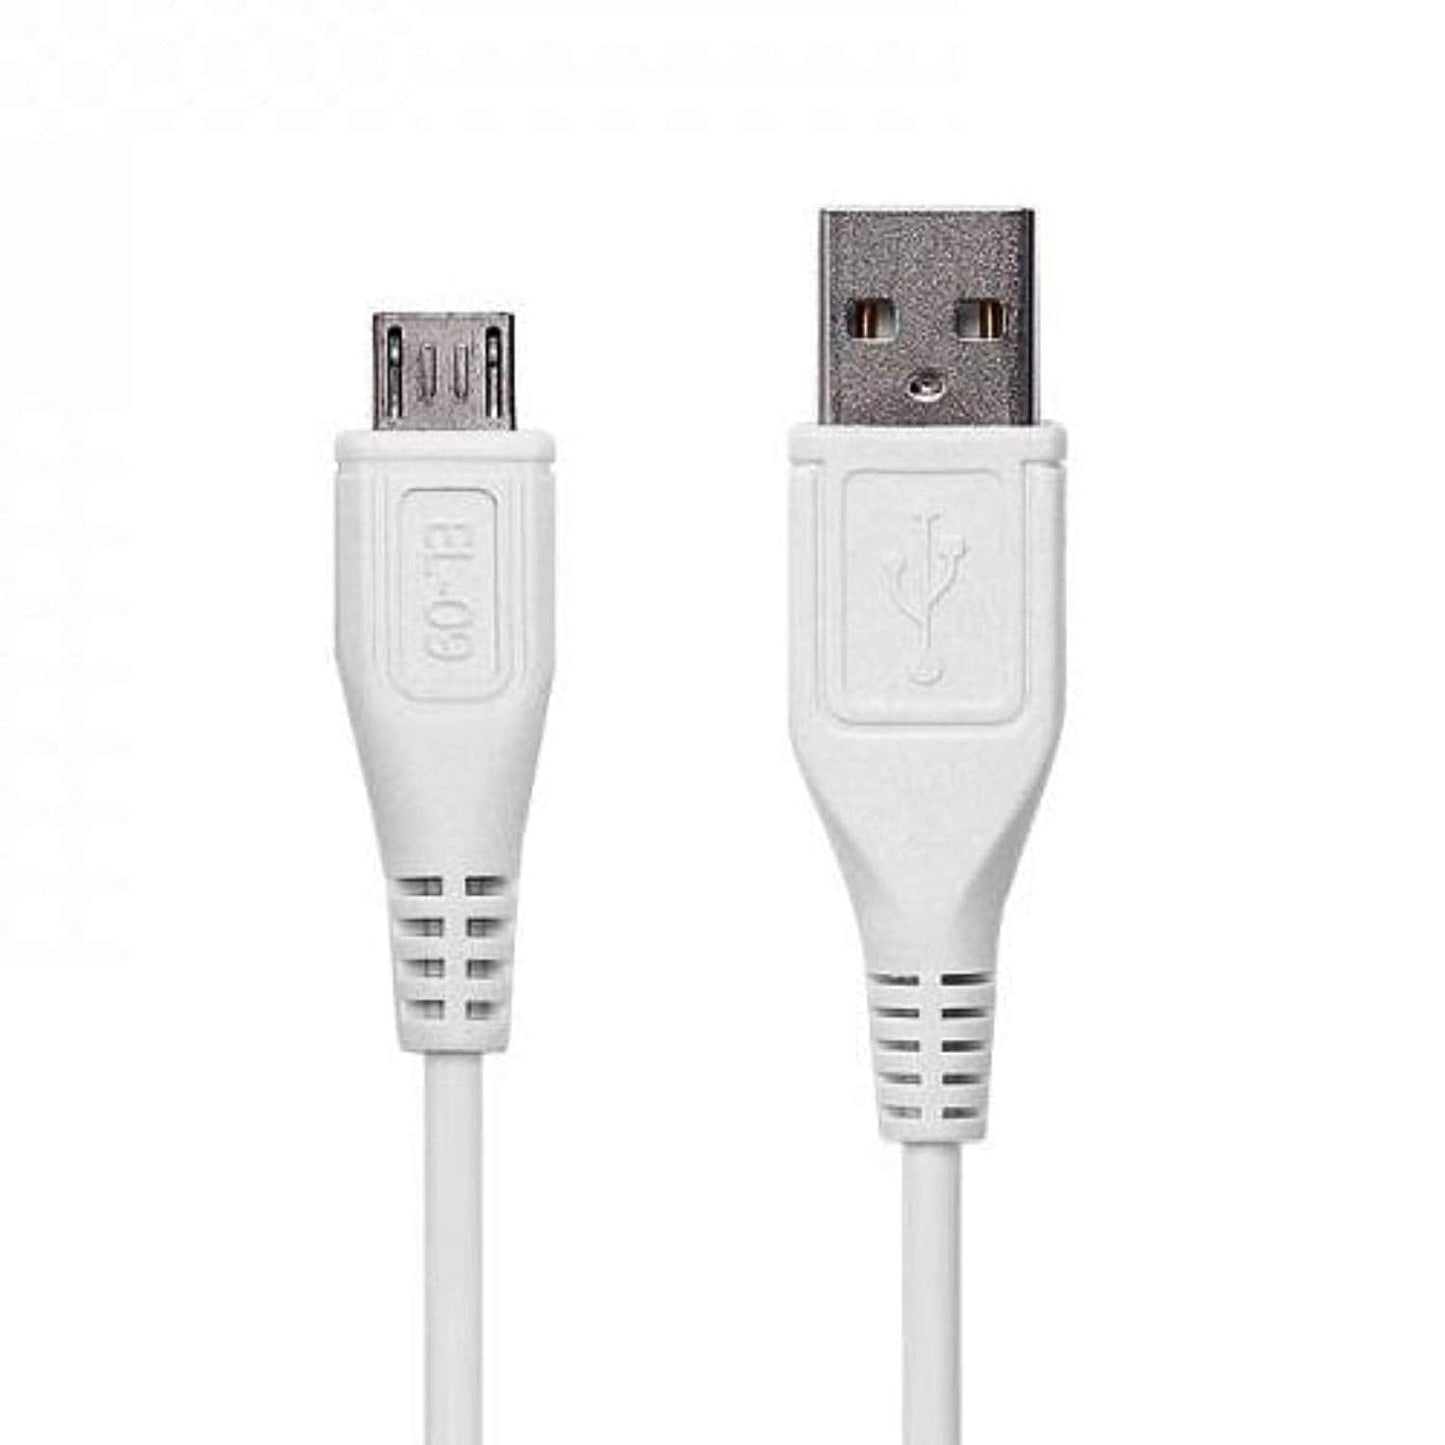 Vivo V11 Pro 18w Fast Charger With Micro USB Data Cable